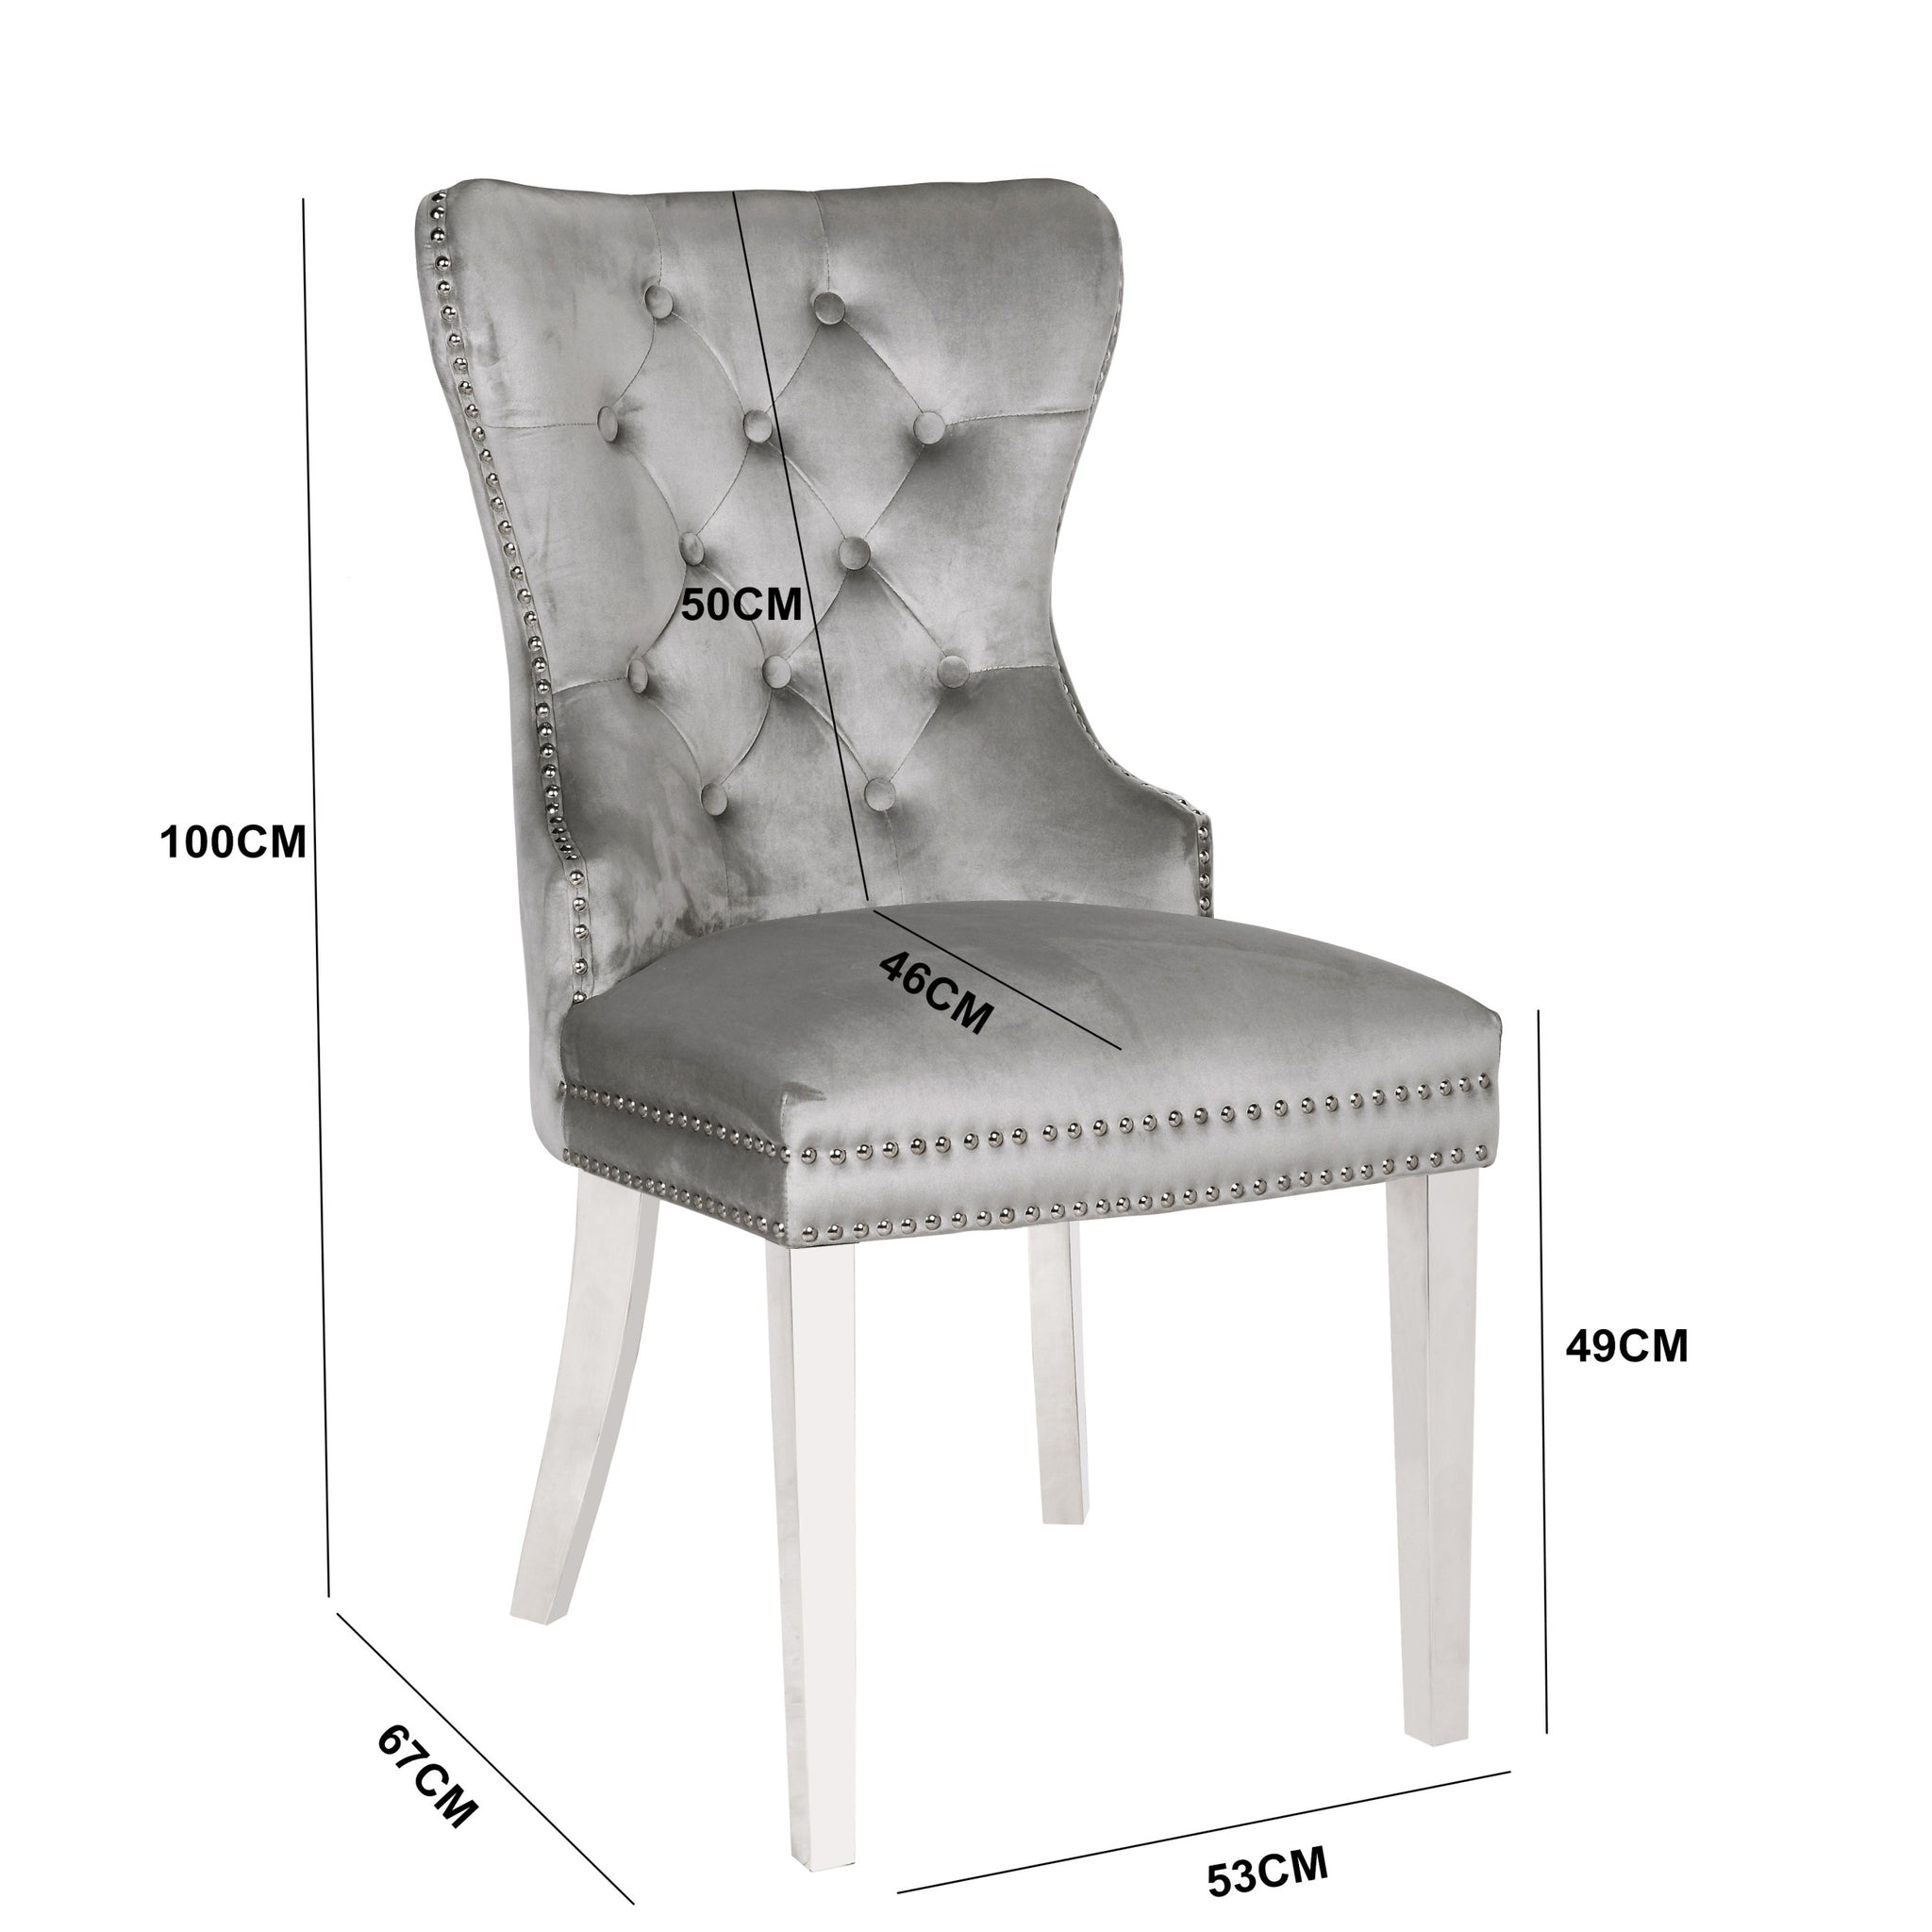 Simba Stainless Steel 2 Piece Chair Finish with Velvet light grey-dining room-contemporary-modern-accent